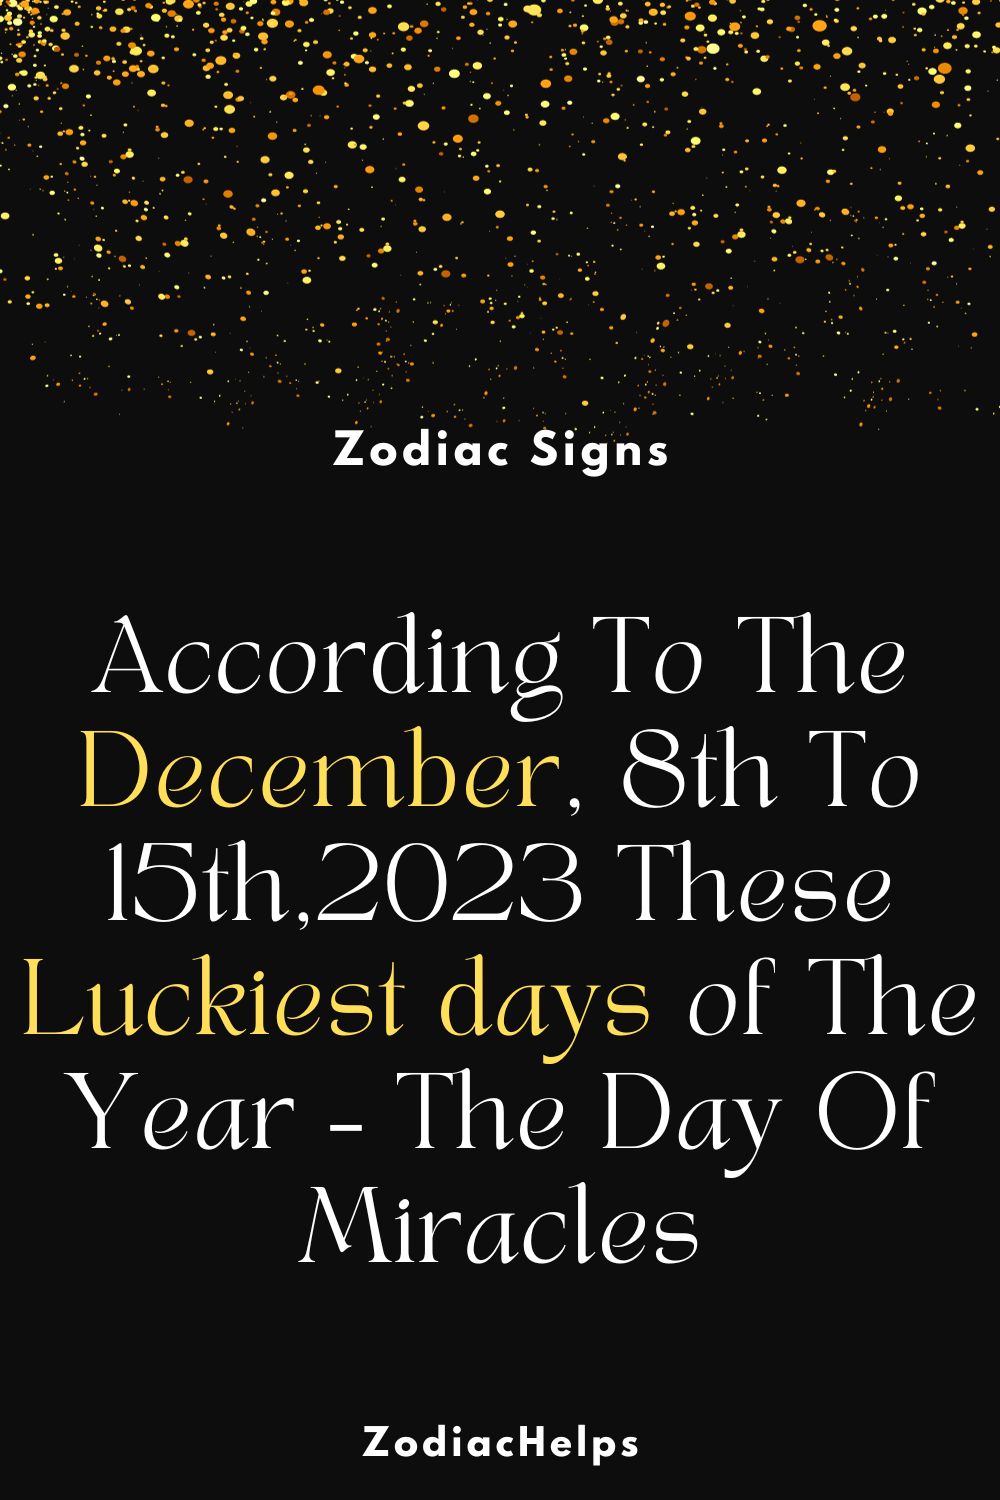 According To The December, 8th To 15th,2023 These Luckiest days of The Year – The Day Of Miracles